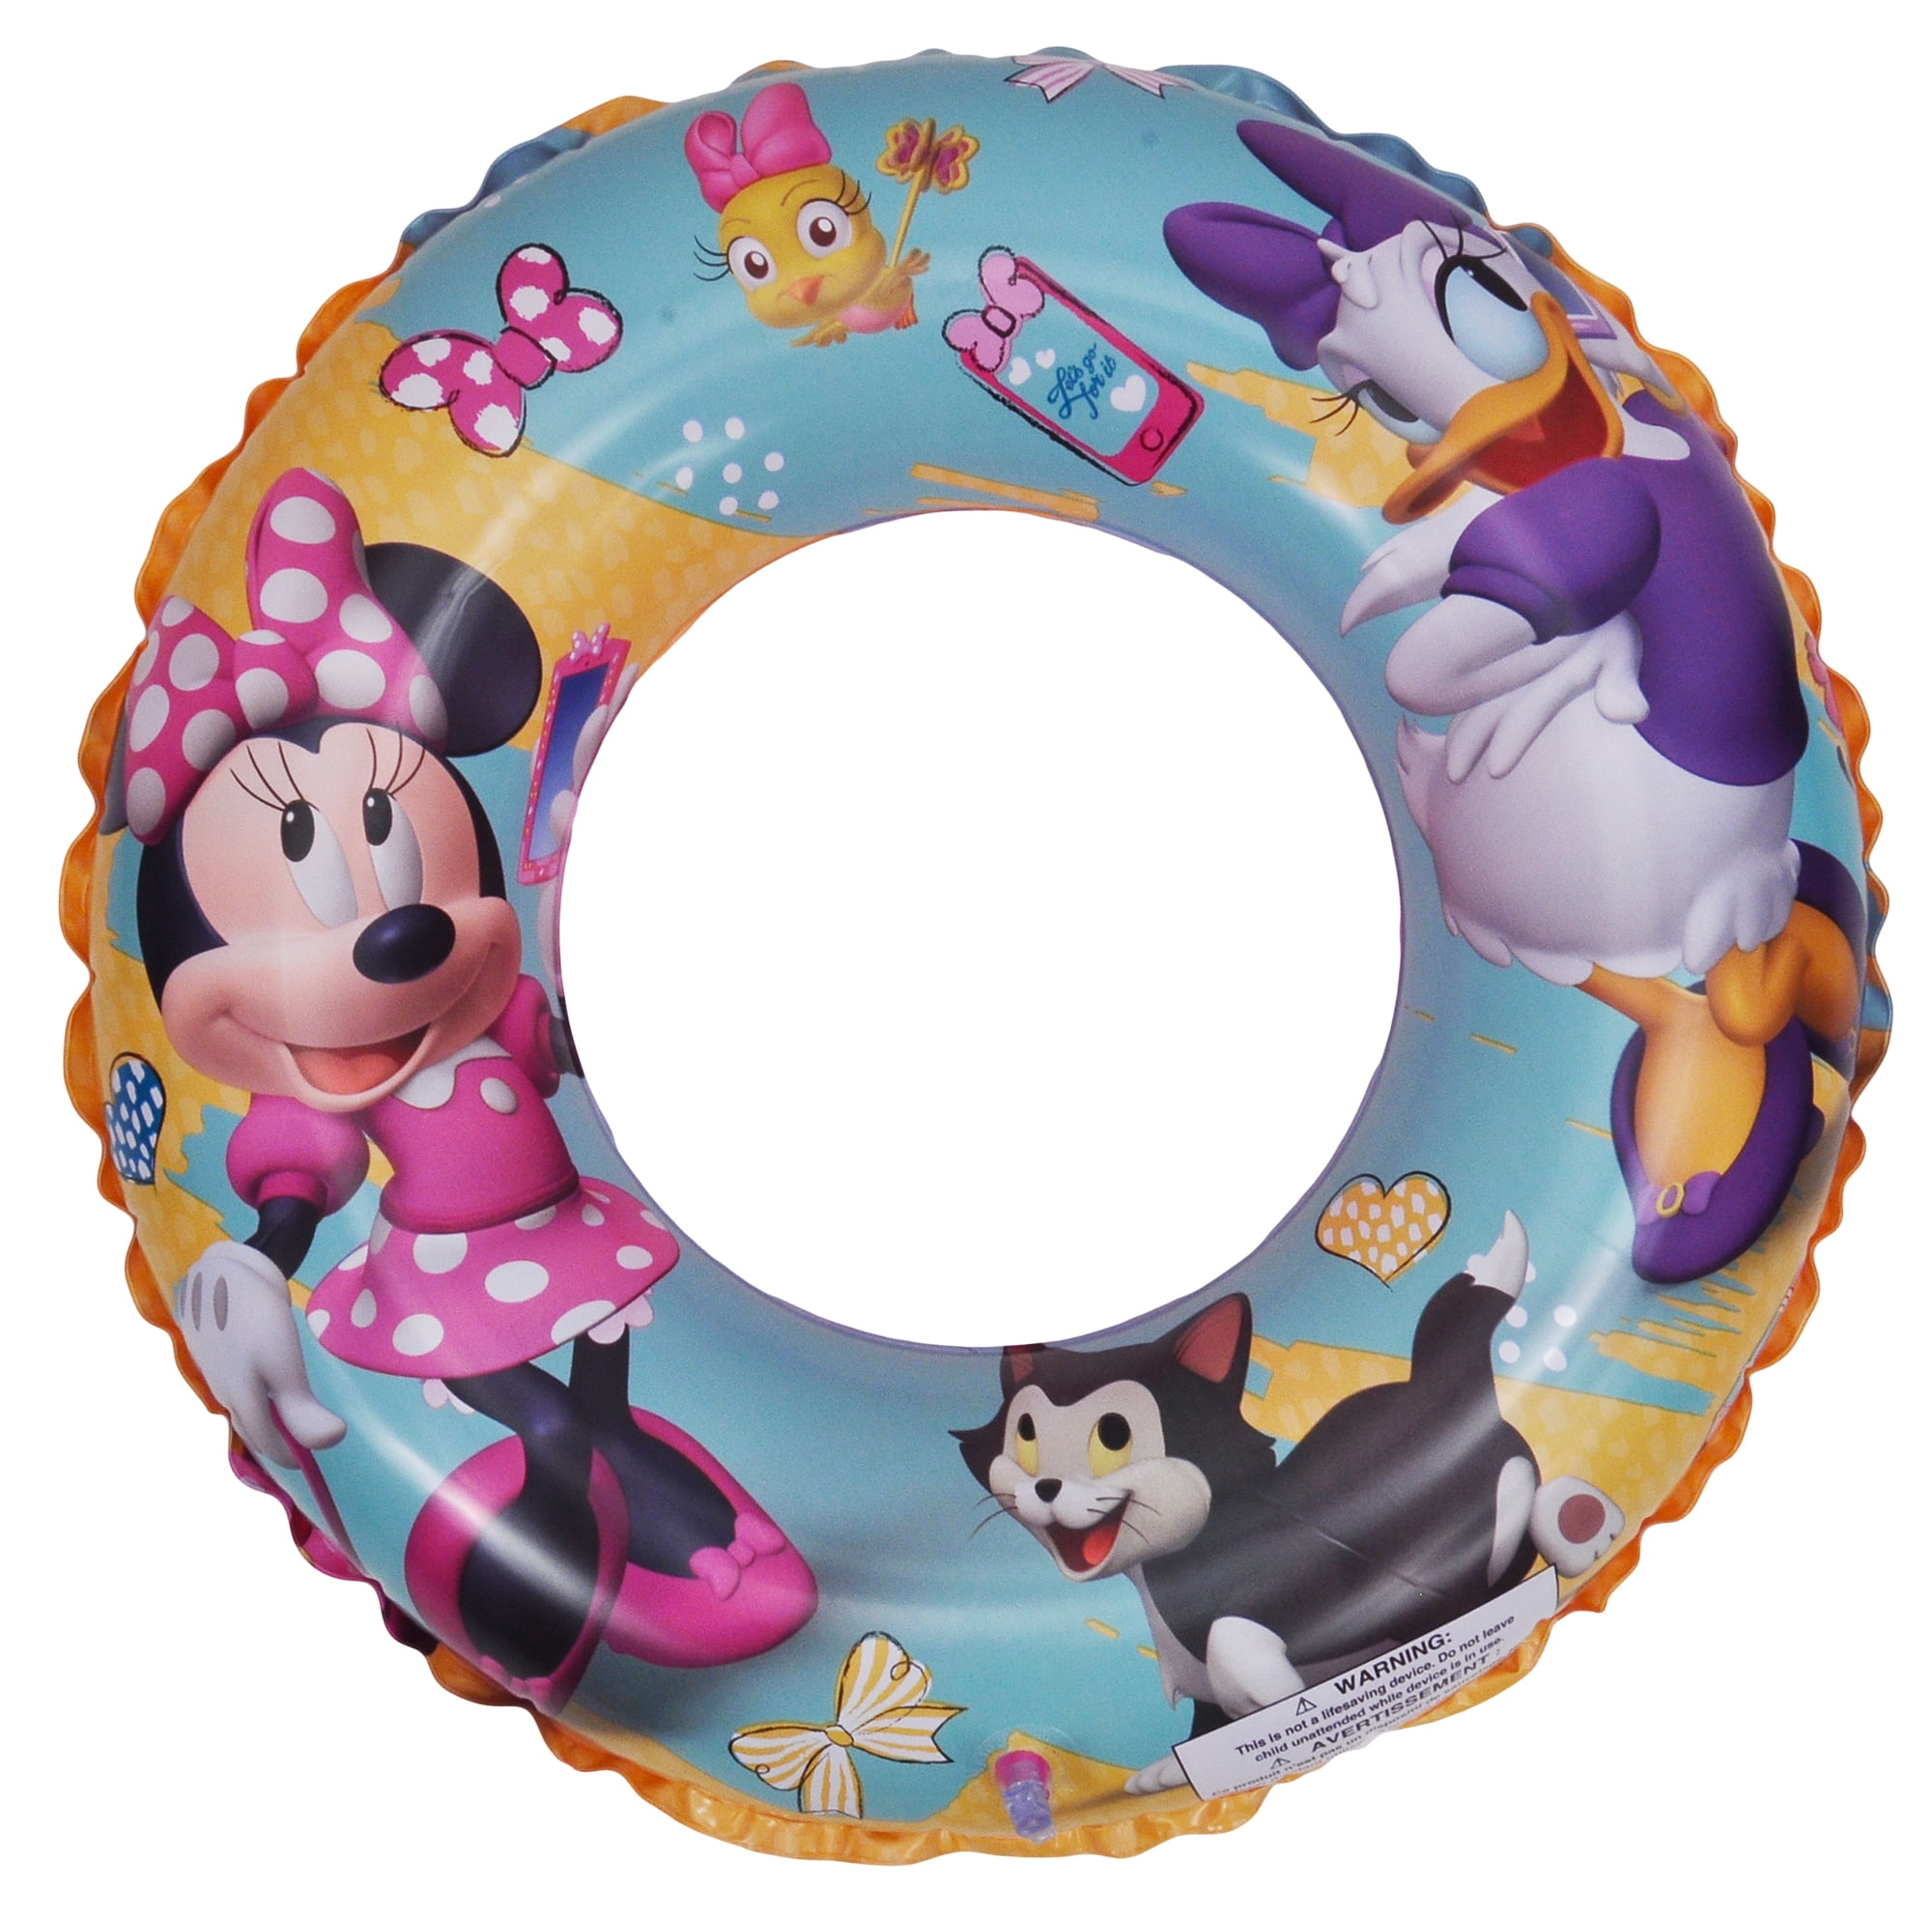 Details about   NWT DISNEY MICKEY MOUSE JUNIOR RIDE IN POOL BEACH FLOAT SEAT INFANT/TODDLER 0-3 